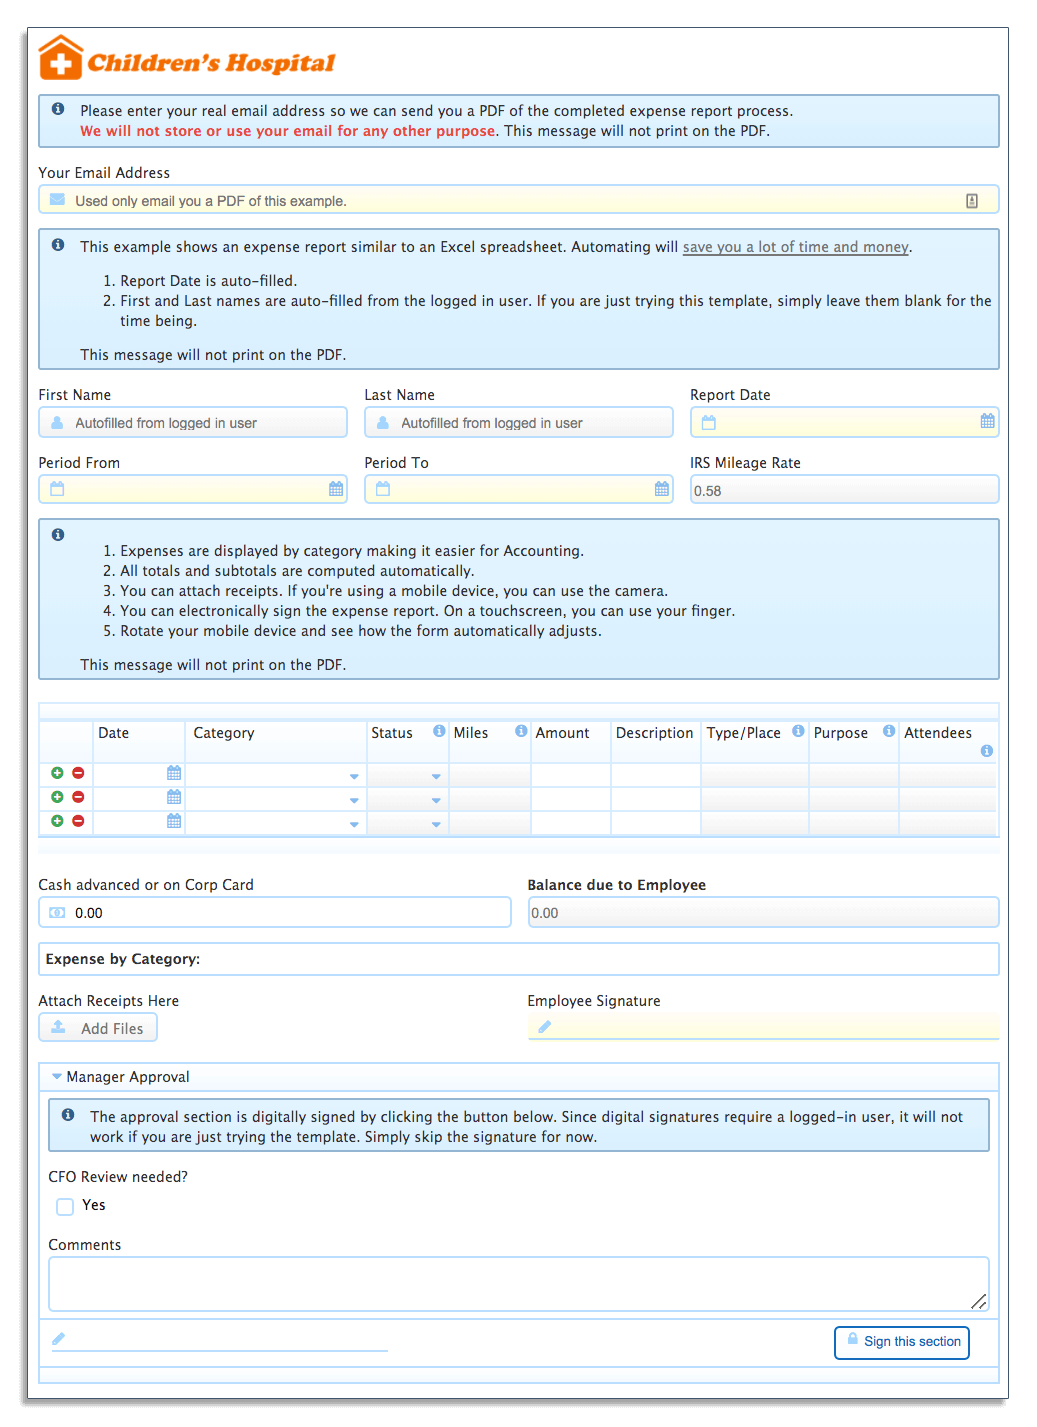 Example of an expense claim form